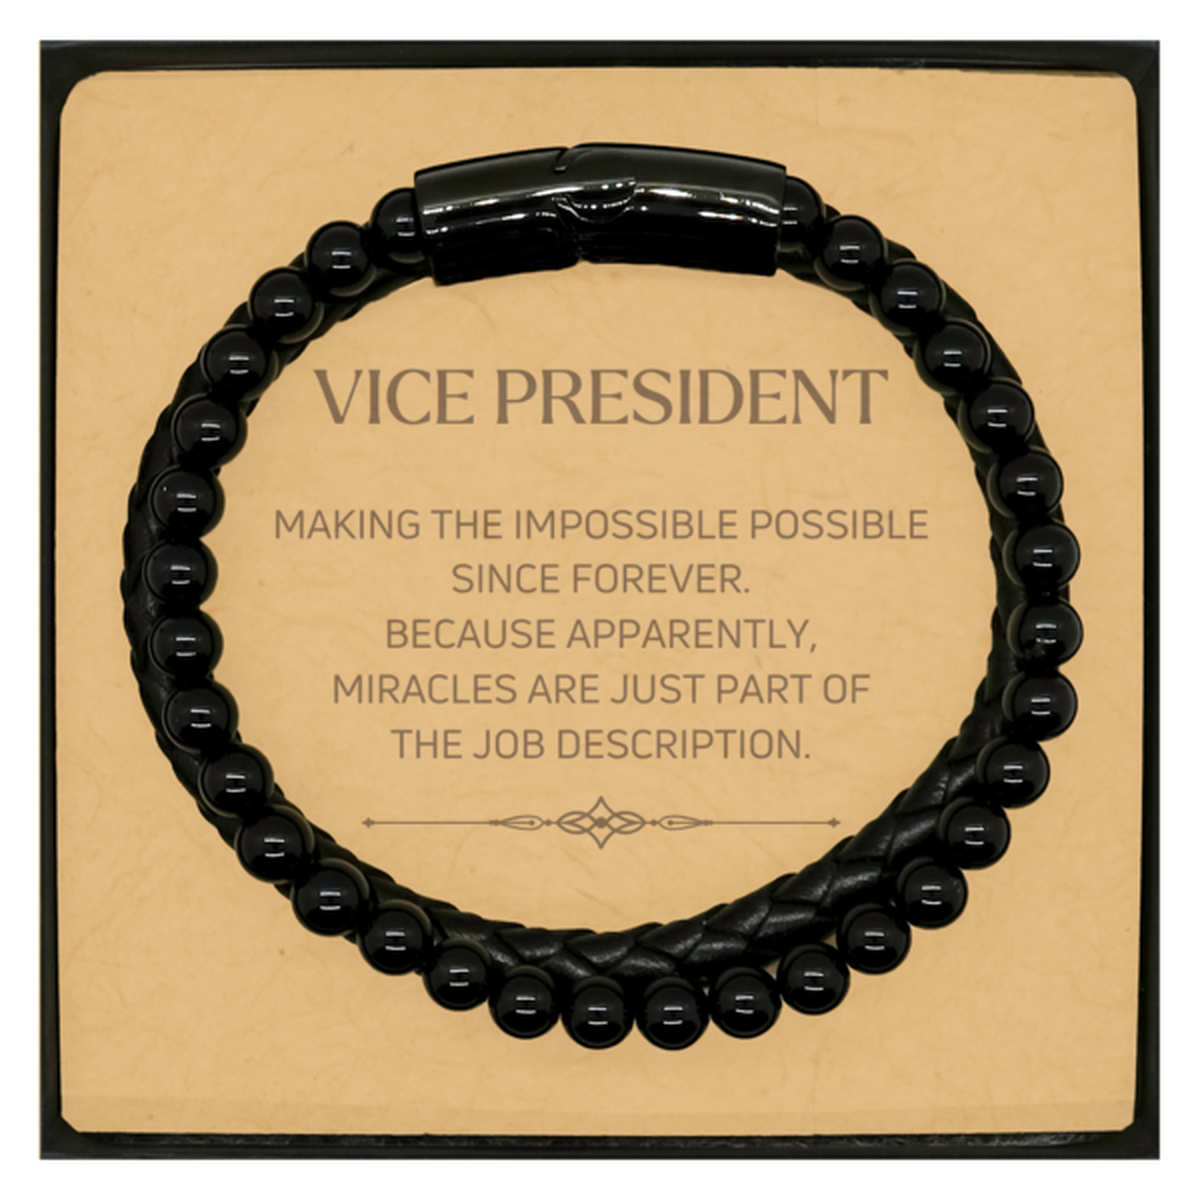 Funny Vice President Gifts, Miracles are just part of the job description, Inspirational Birthday Christmas Stone Leather Bracelets For Vice President, Men, Women, Coworkers, Friends, Boss